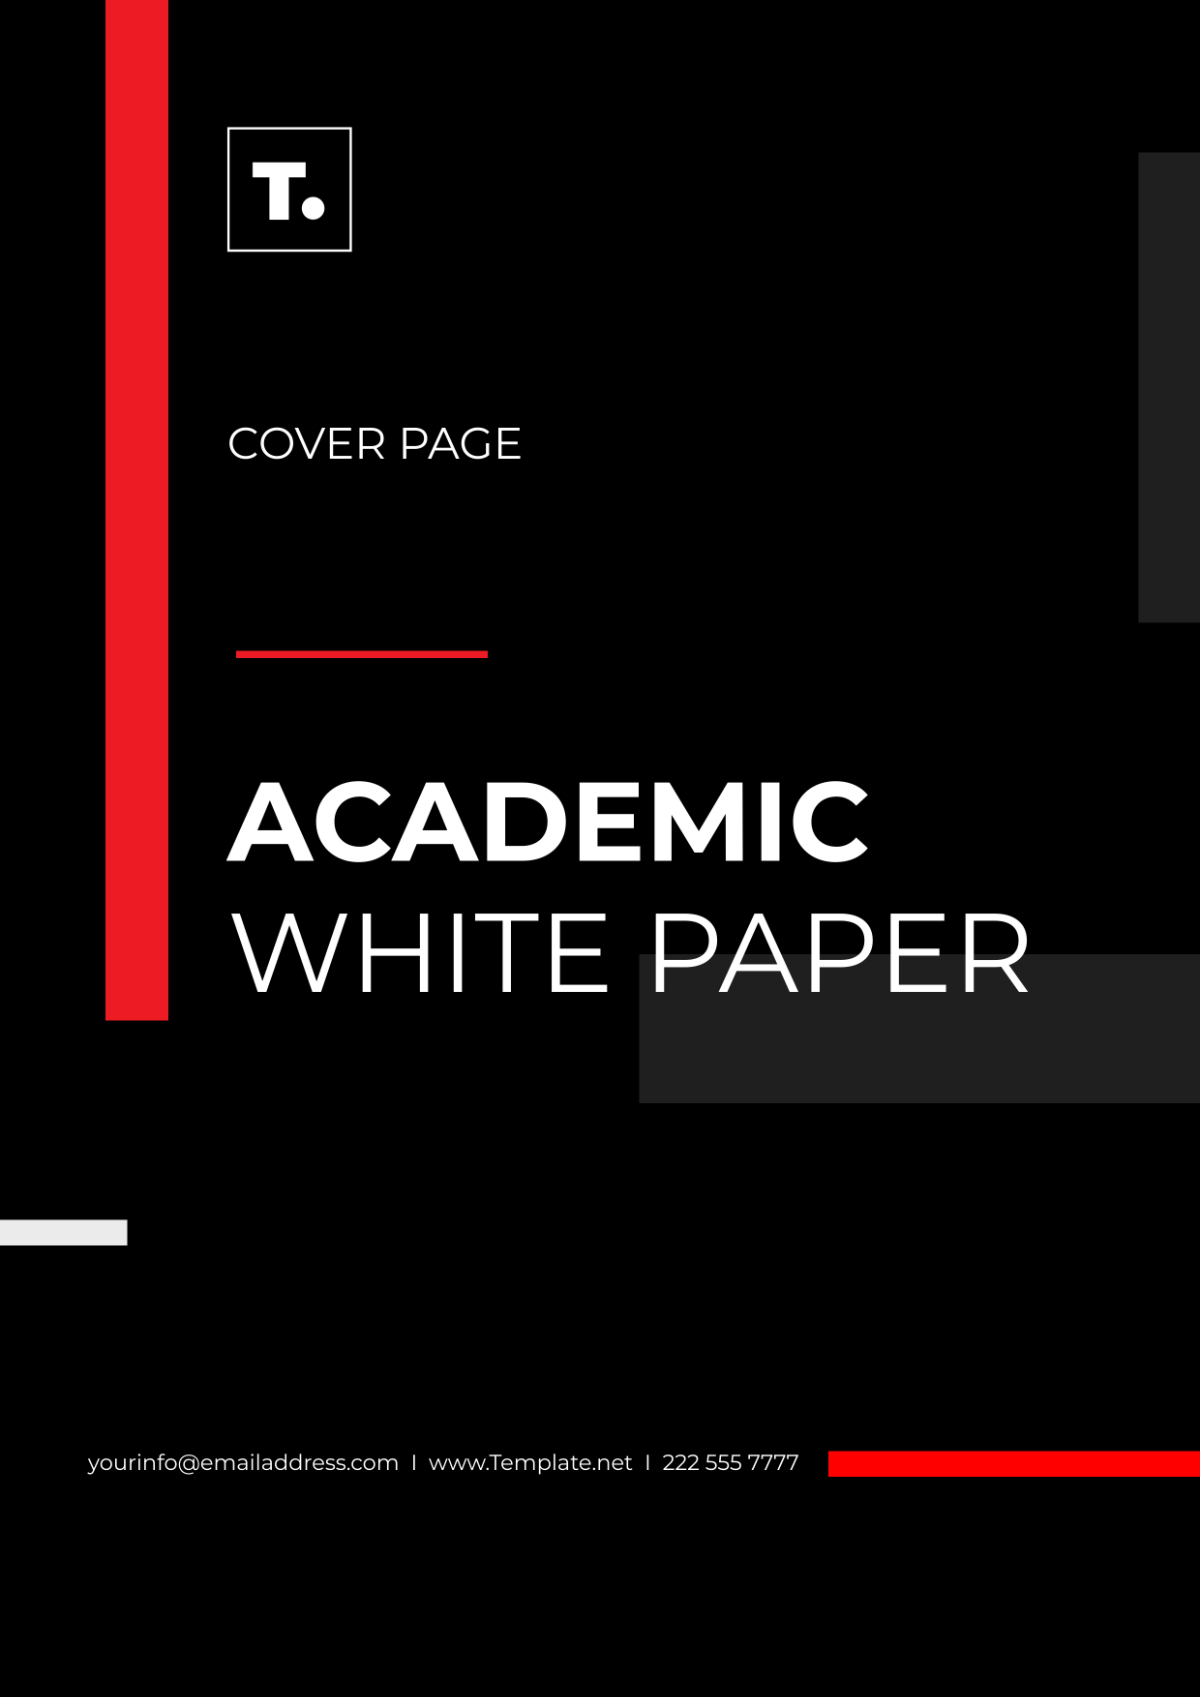 Academic White Paper Cover Page